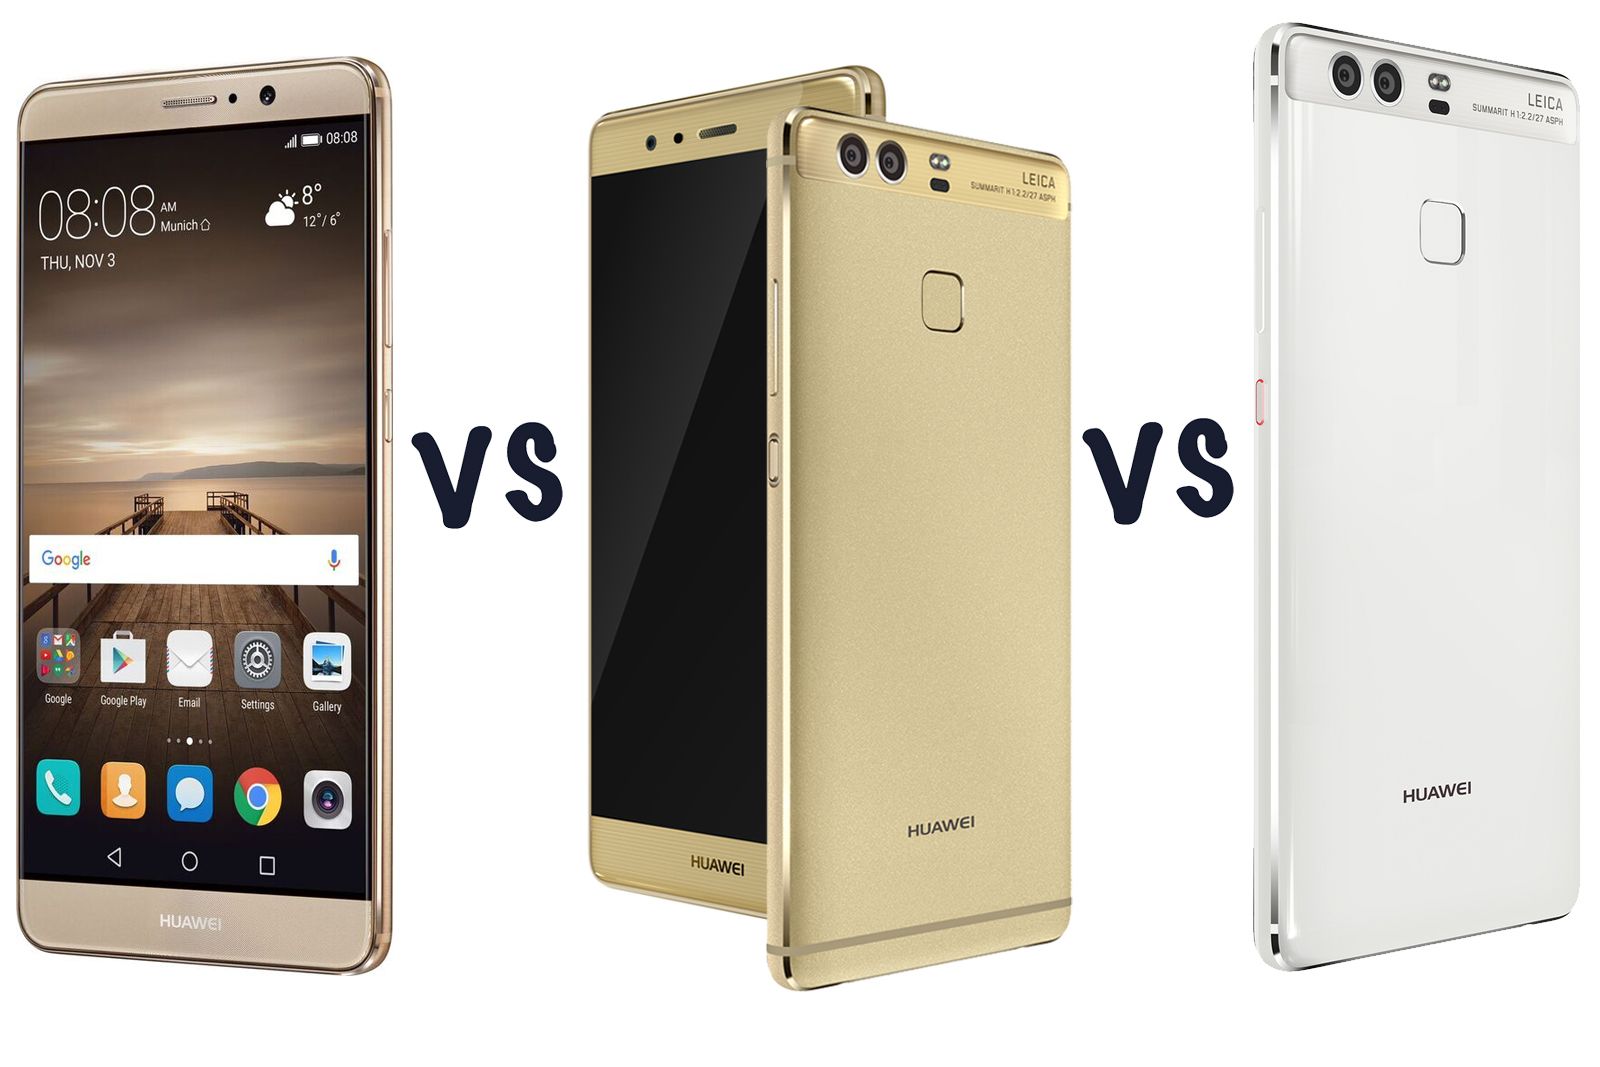 Clínica Microordenador juez Huawei P9 vs Huawei P9 Plus vs Huawei Mate 9: What's the difference?